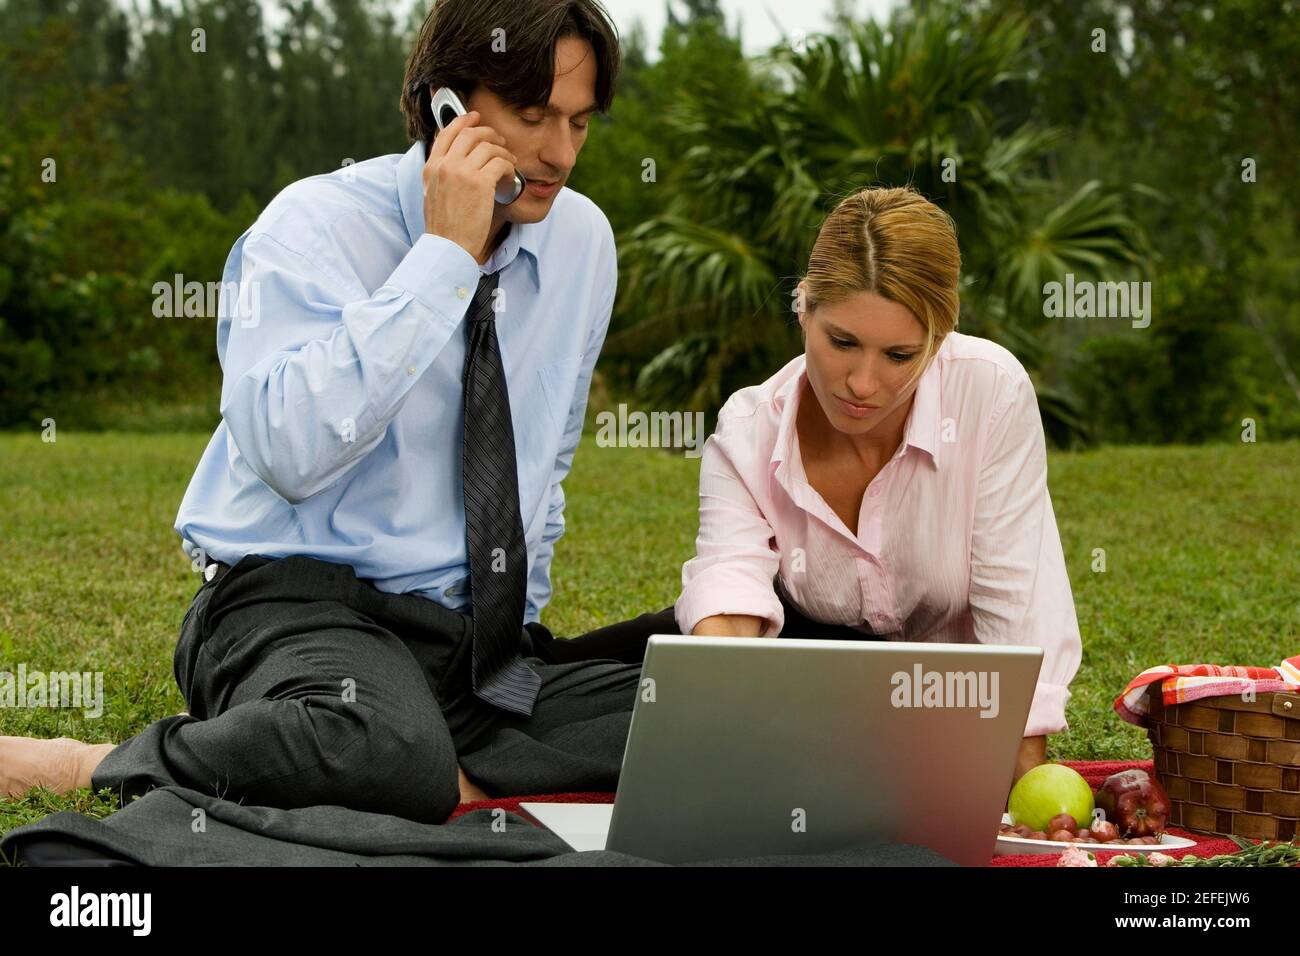 Close-up of a businessman and a businesswoman working on a laptop Stock Photo